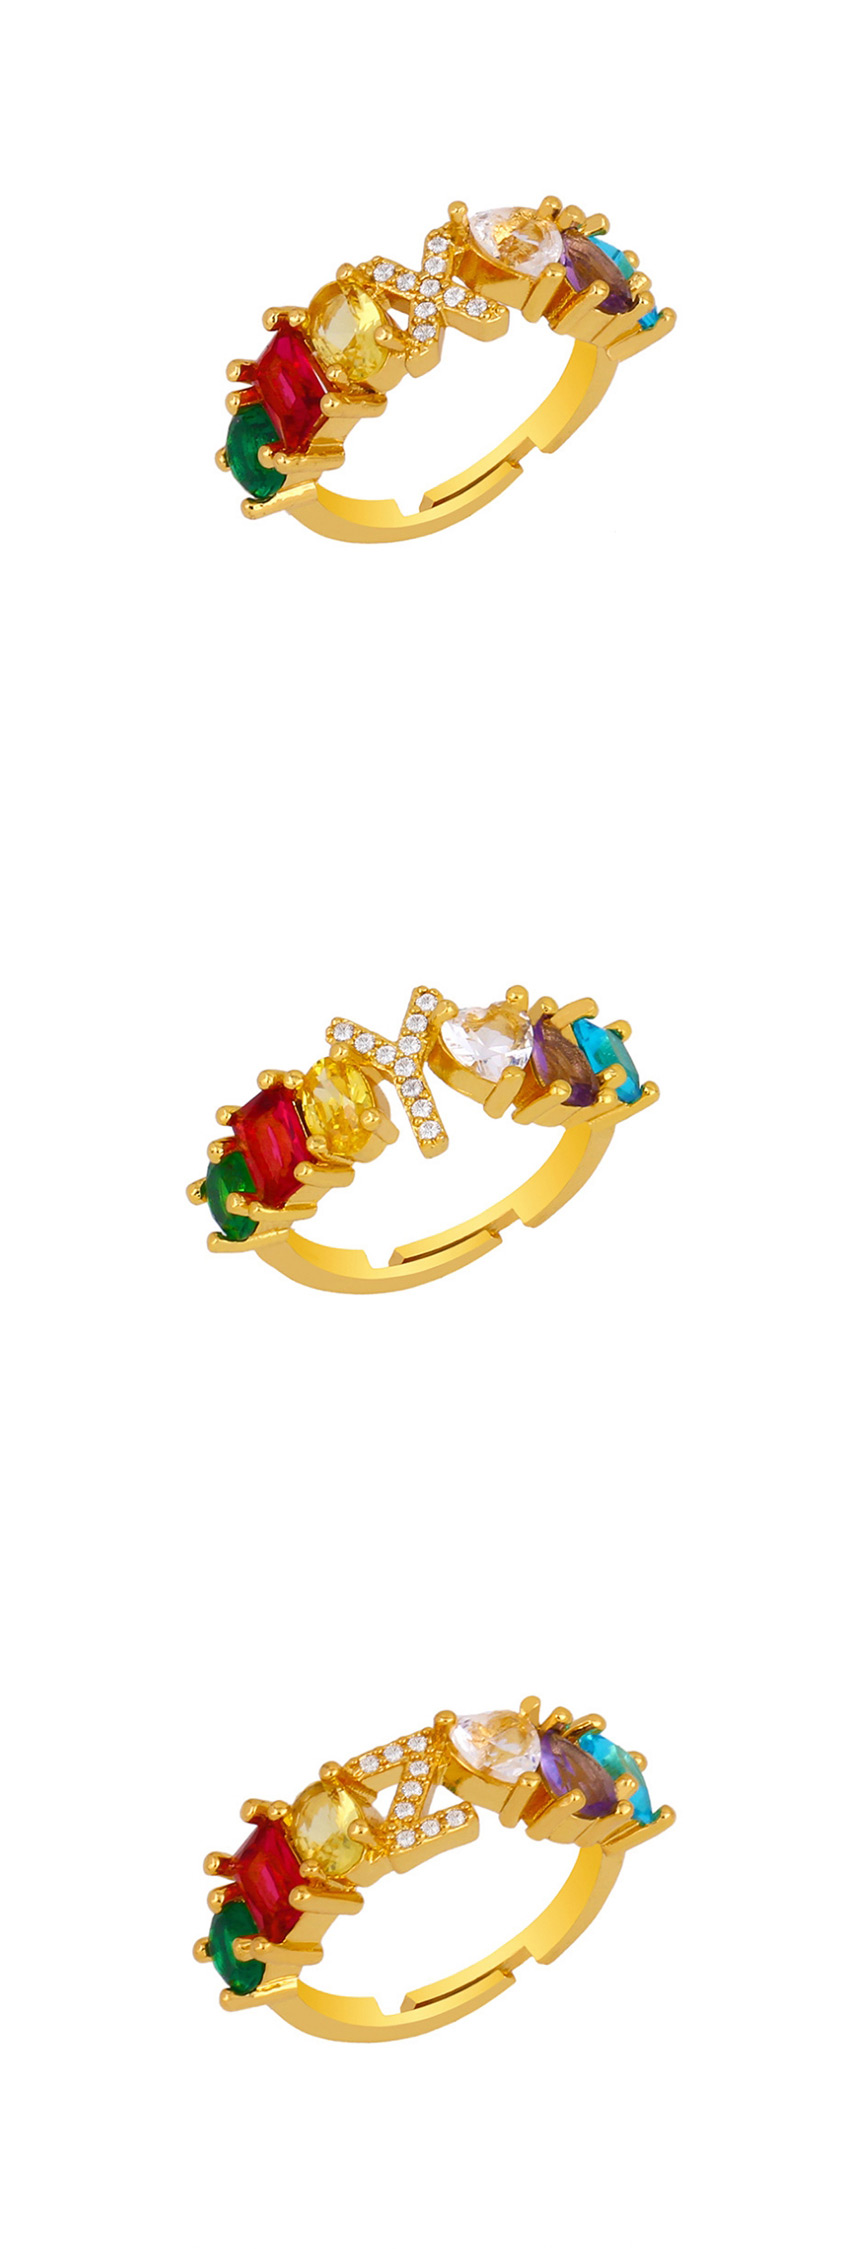 Fashion T Gold Heart-shaped Adjustable Ring With Colorful Diamond Letters,Rings